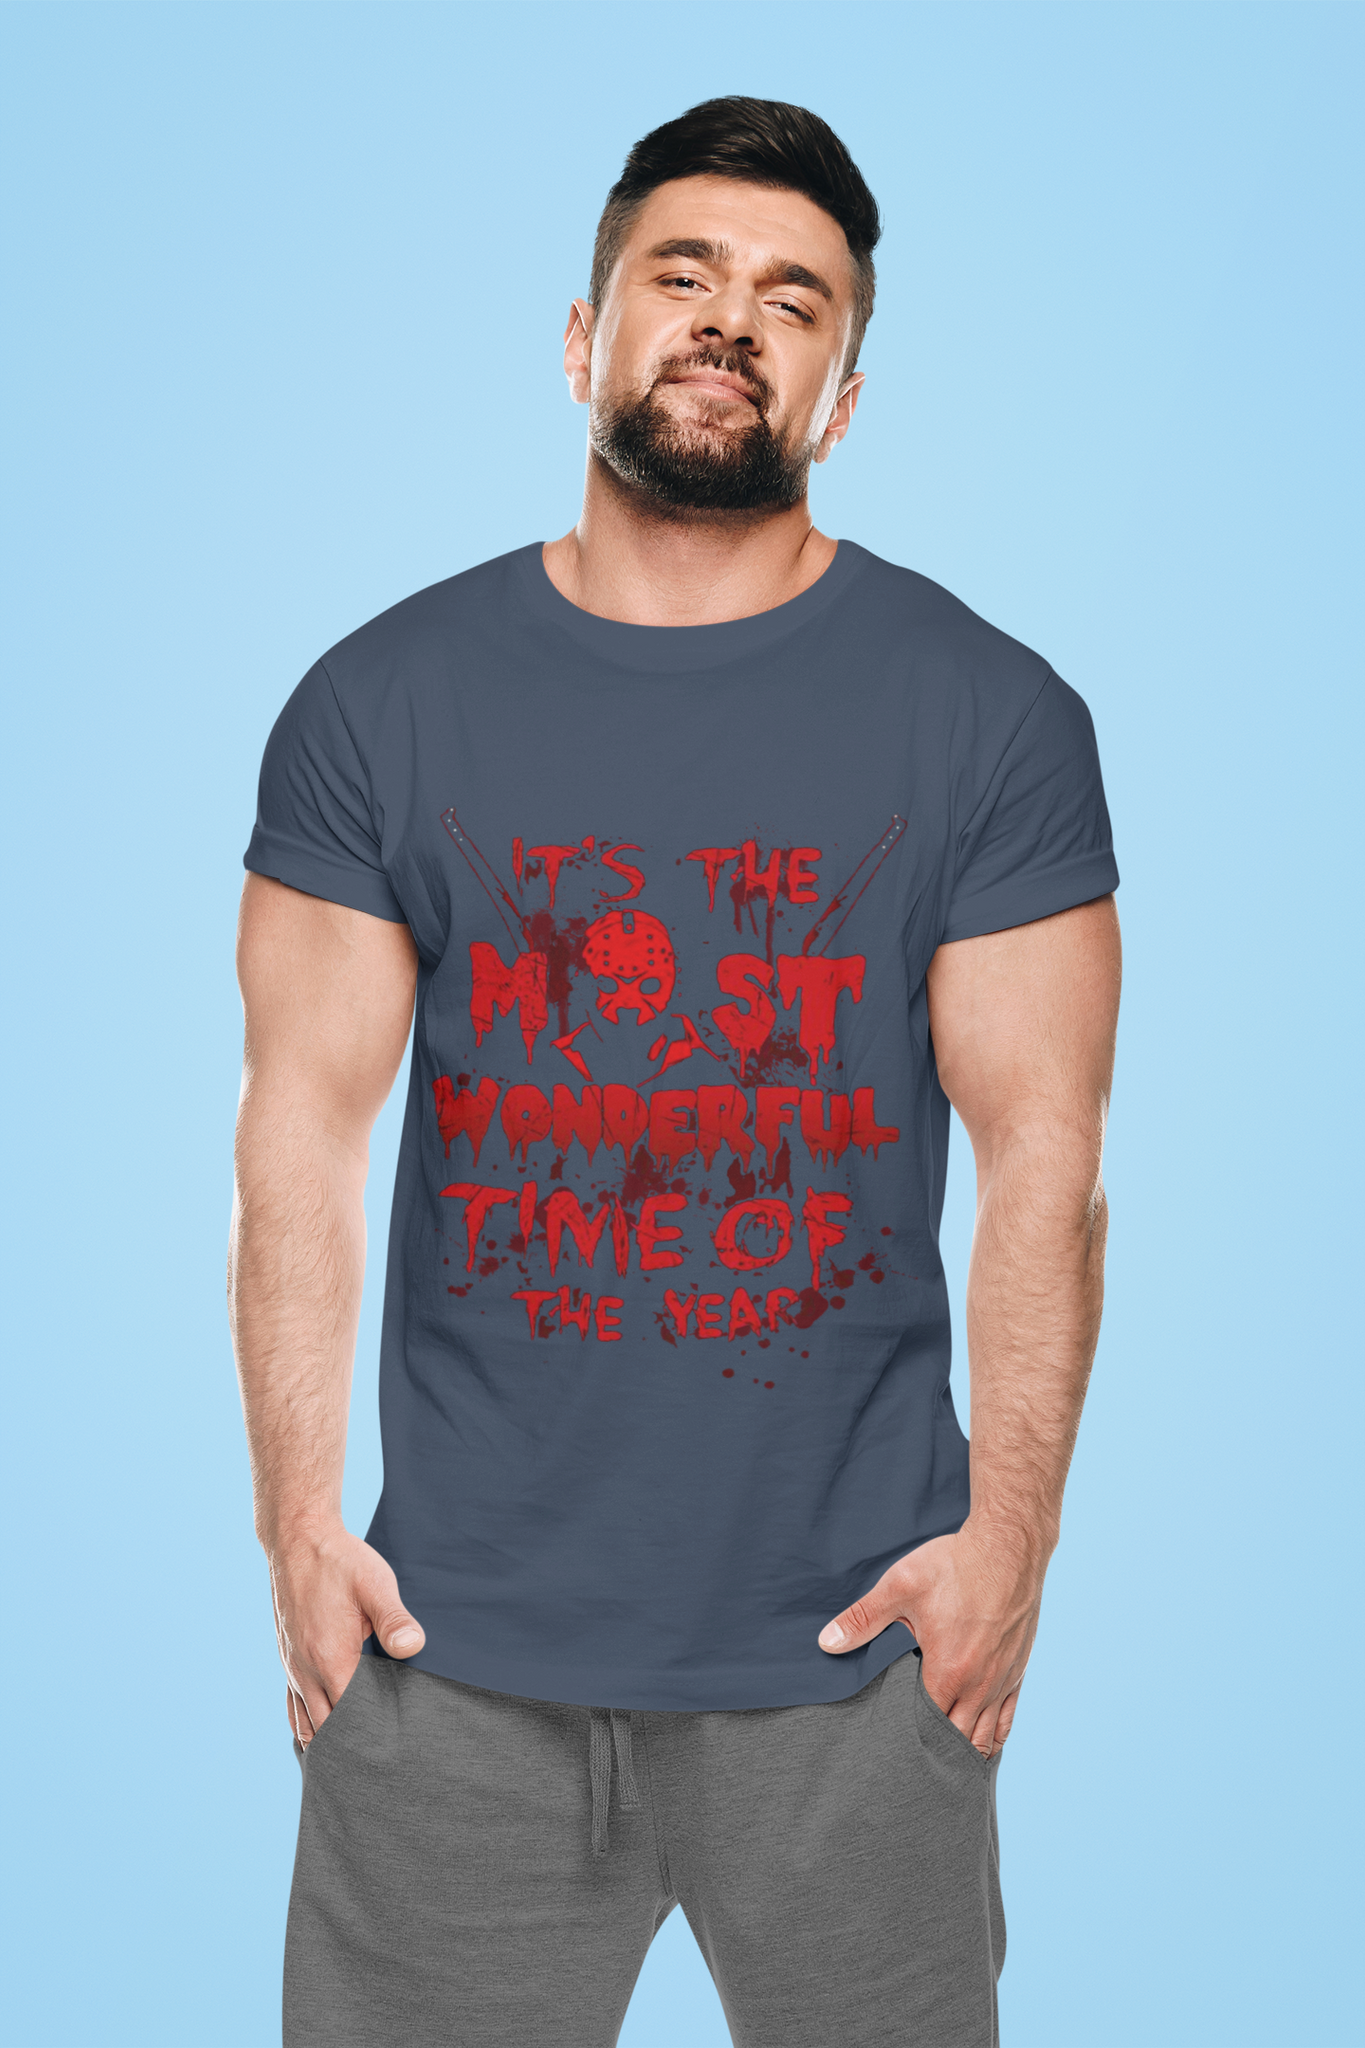 Friday 13th T Shirt, Jason Voorhees Shirt, Its The Most Wonderful Time Of The Year T Shirt, Halloween Gifts